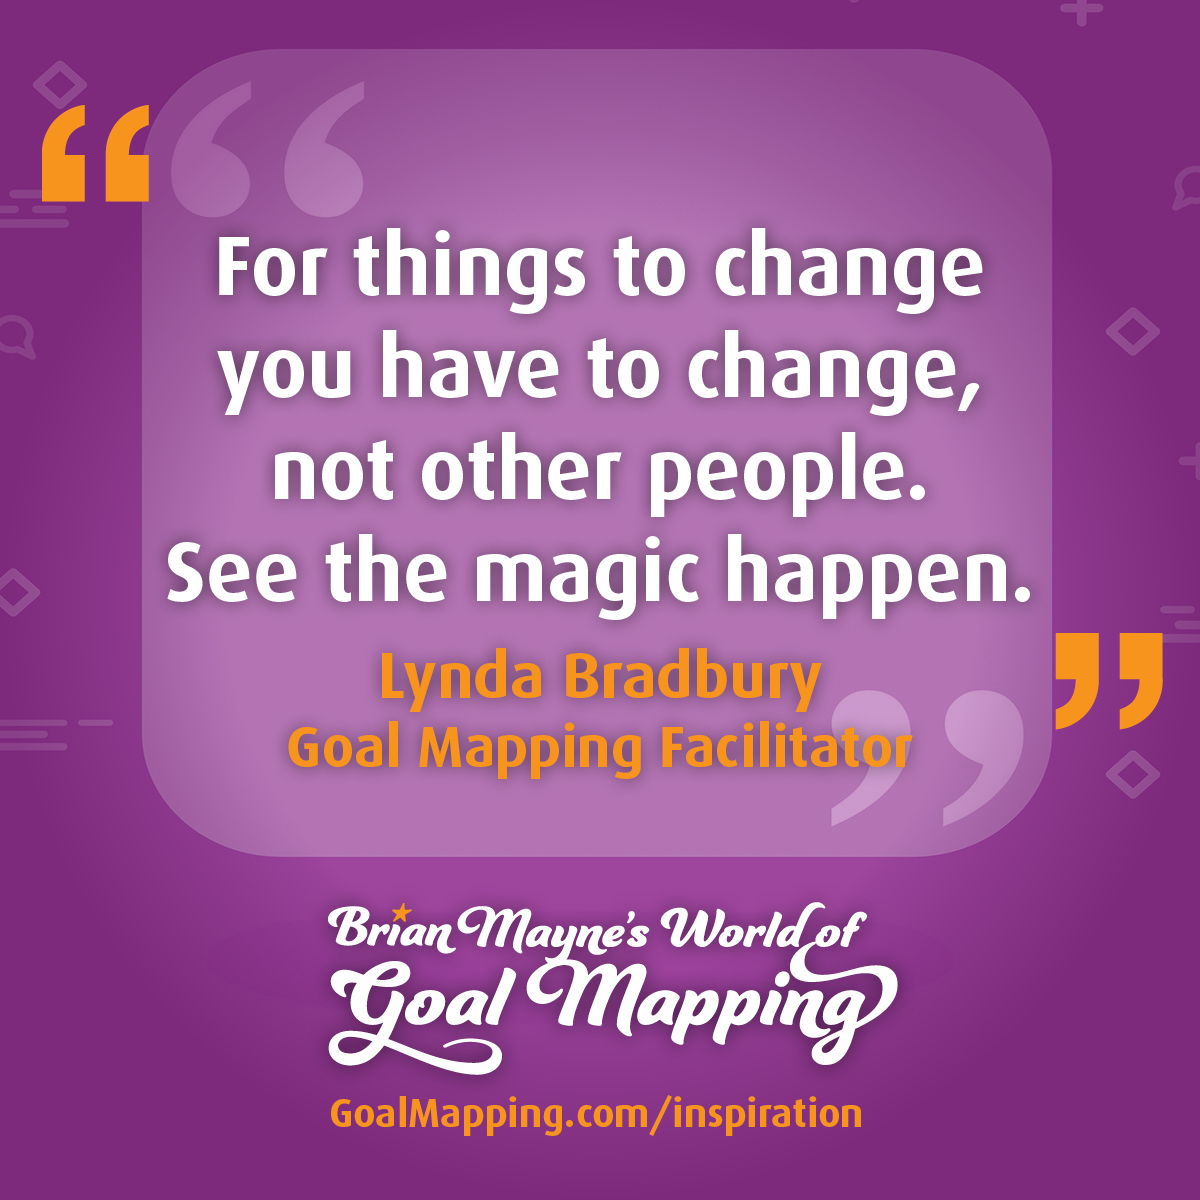 "For things to change you have to change not other people. See the magic happen." Lynda Bradbury Goal Mapping Facilitator